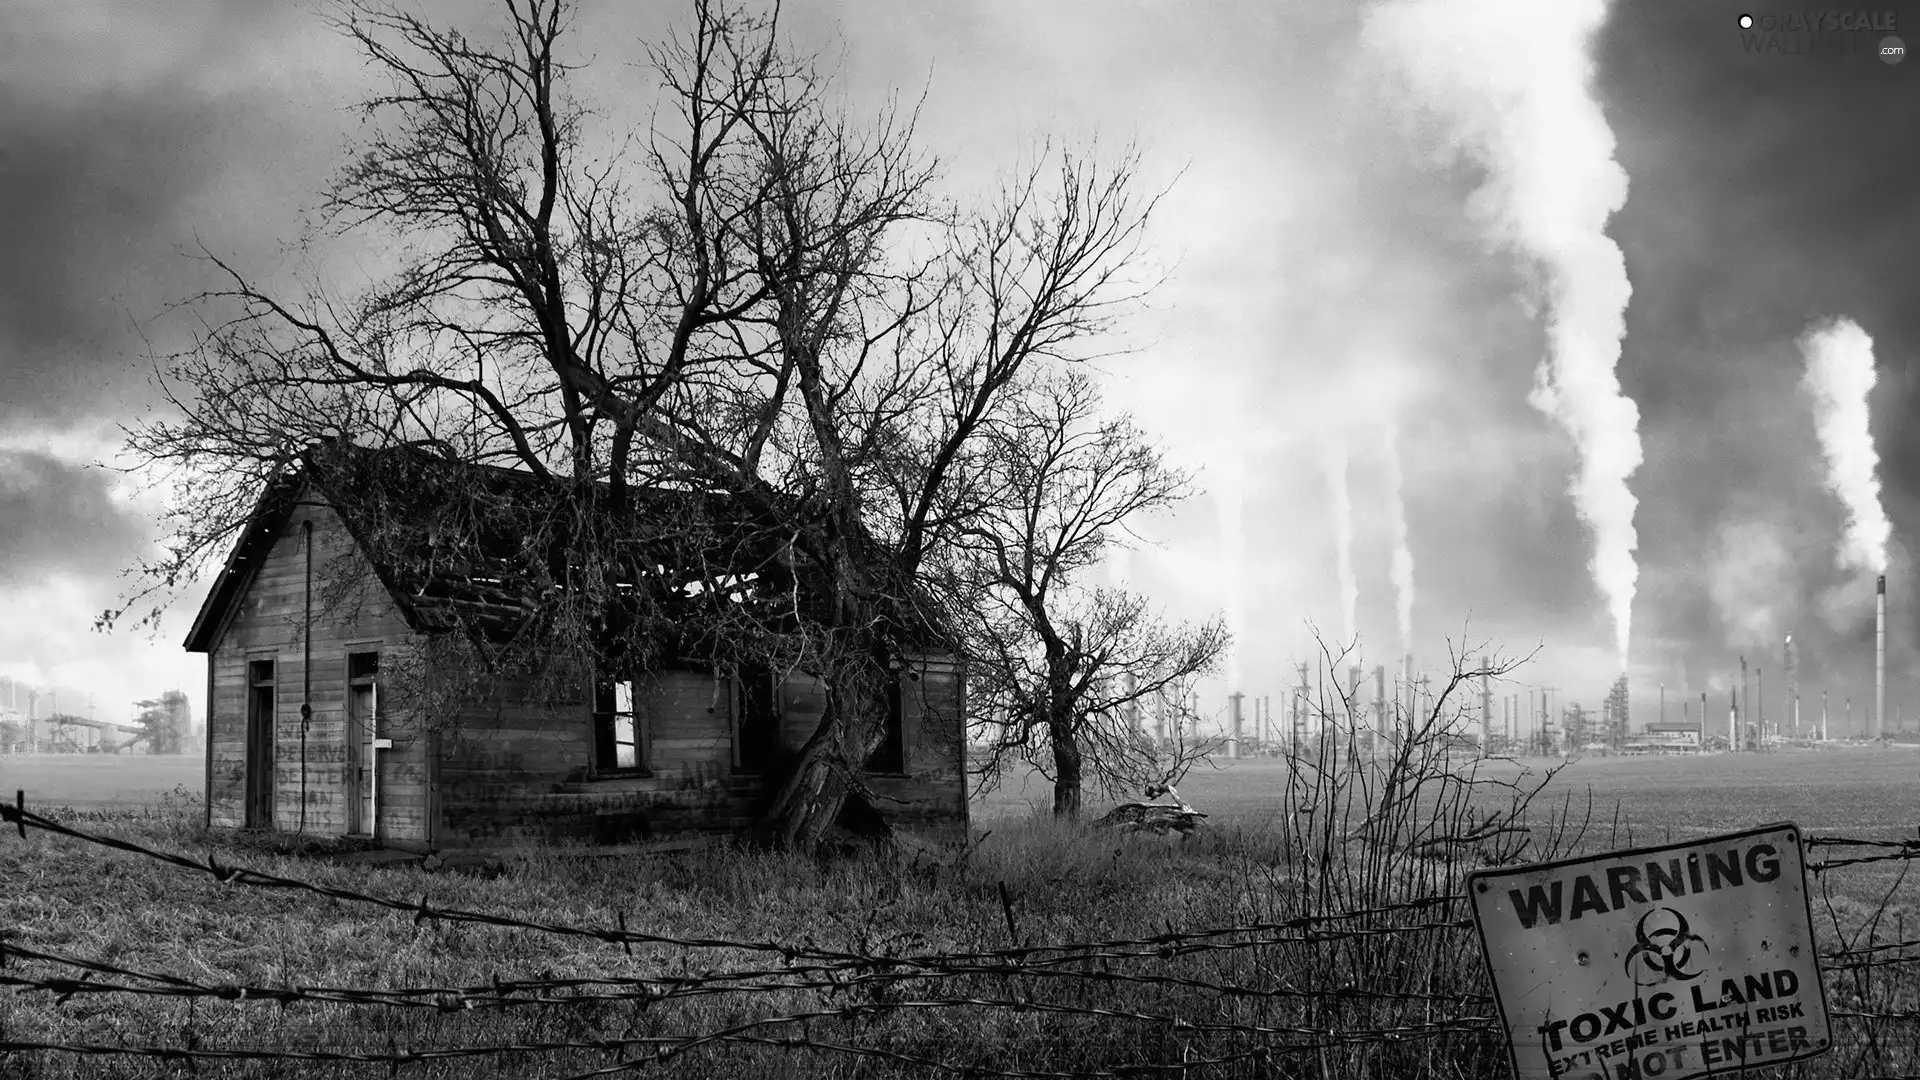 house, trees, Chimneys, viewes, smoke, damaged, Old car, wires